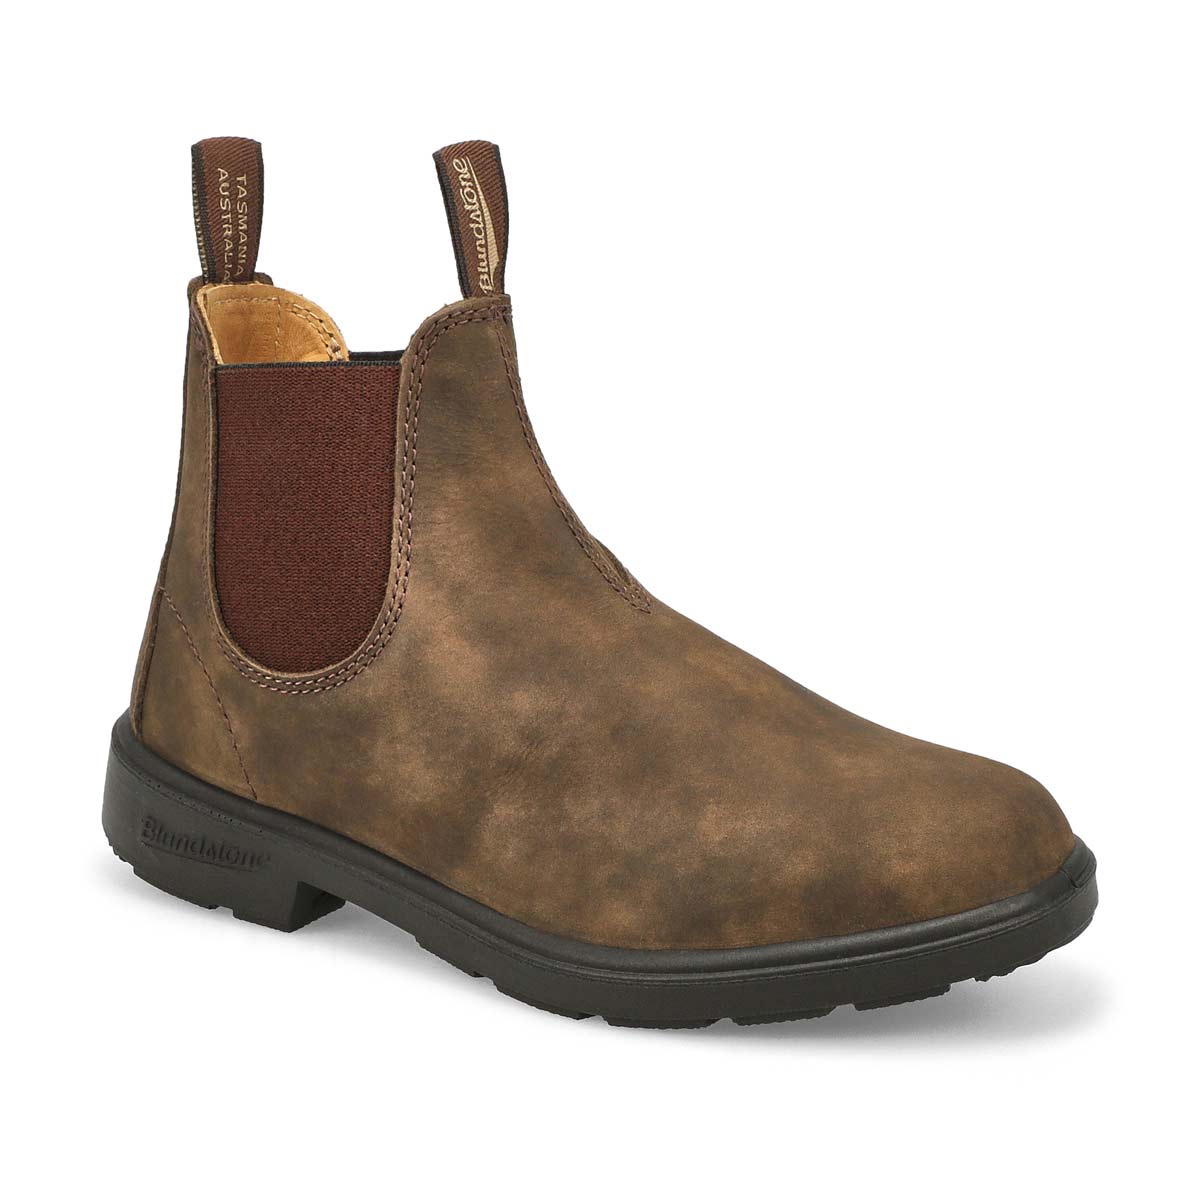 similar to blundstone boots